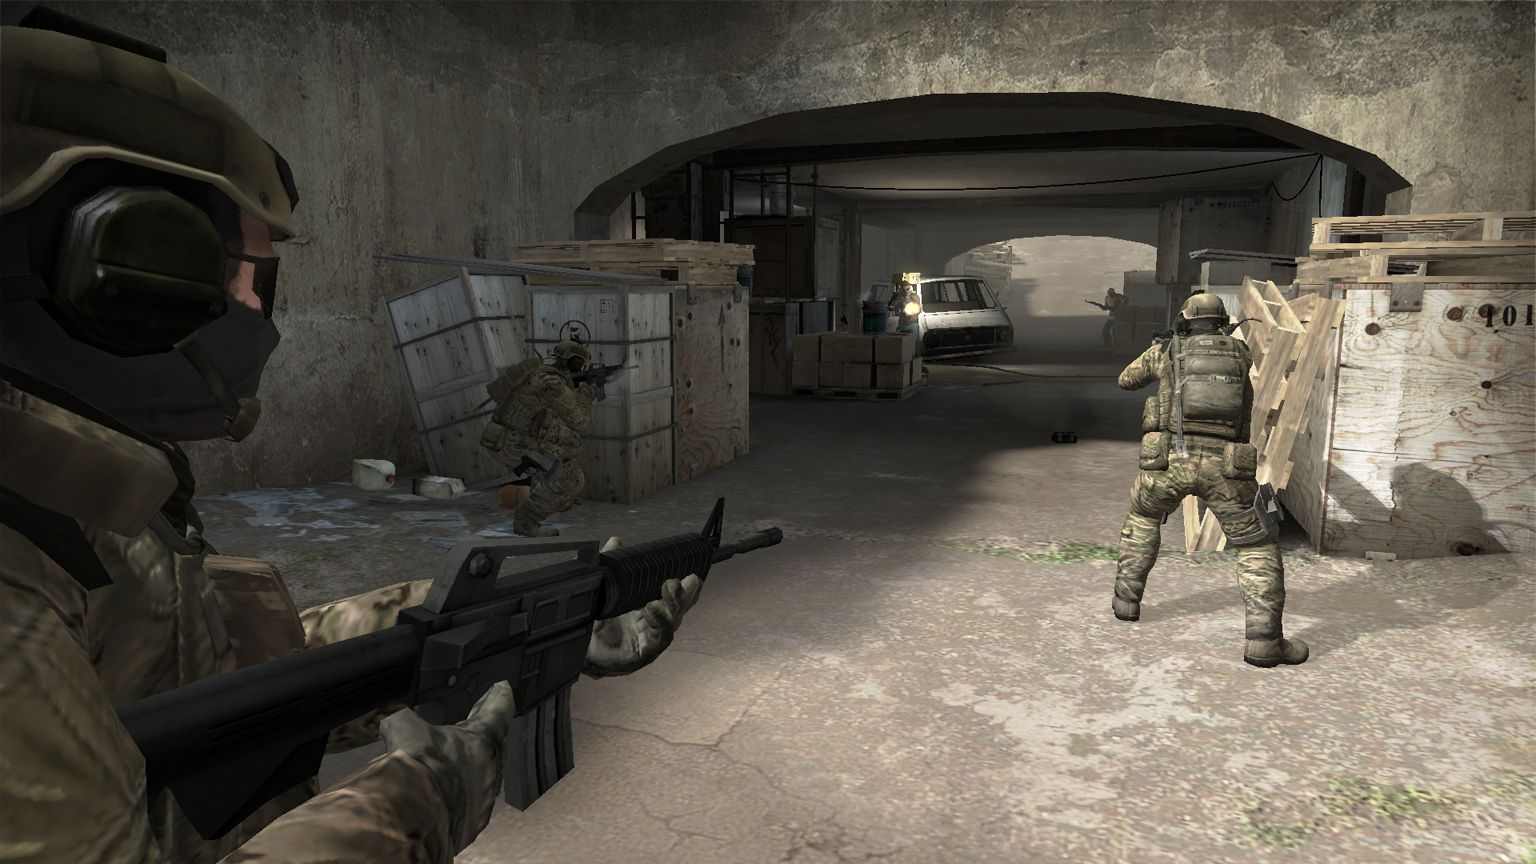 download counter strike global for free